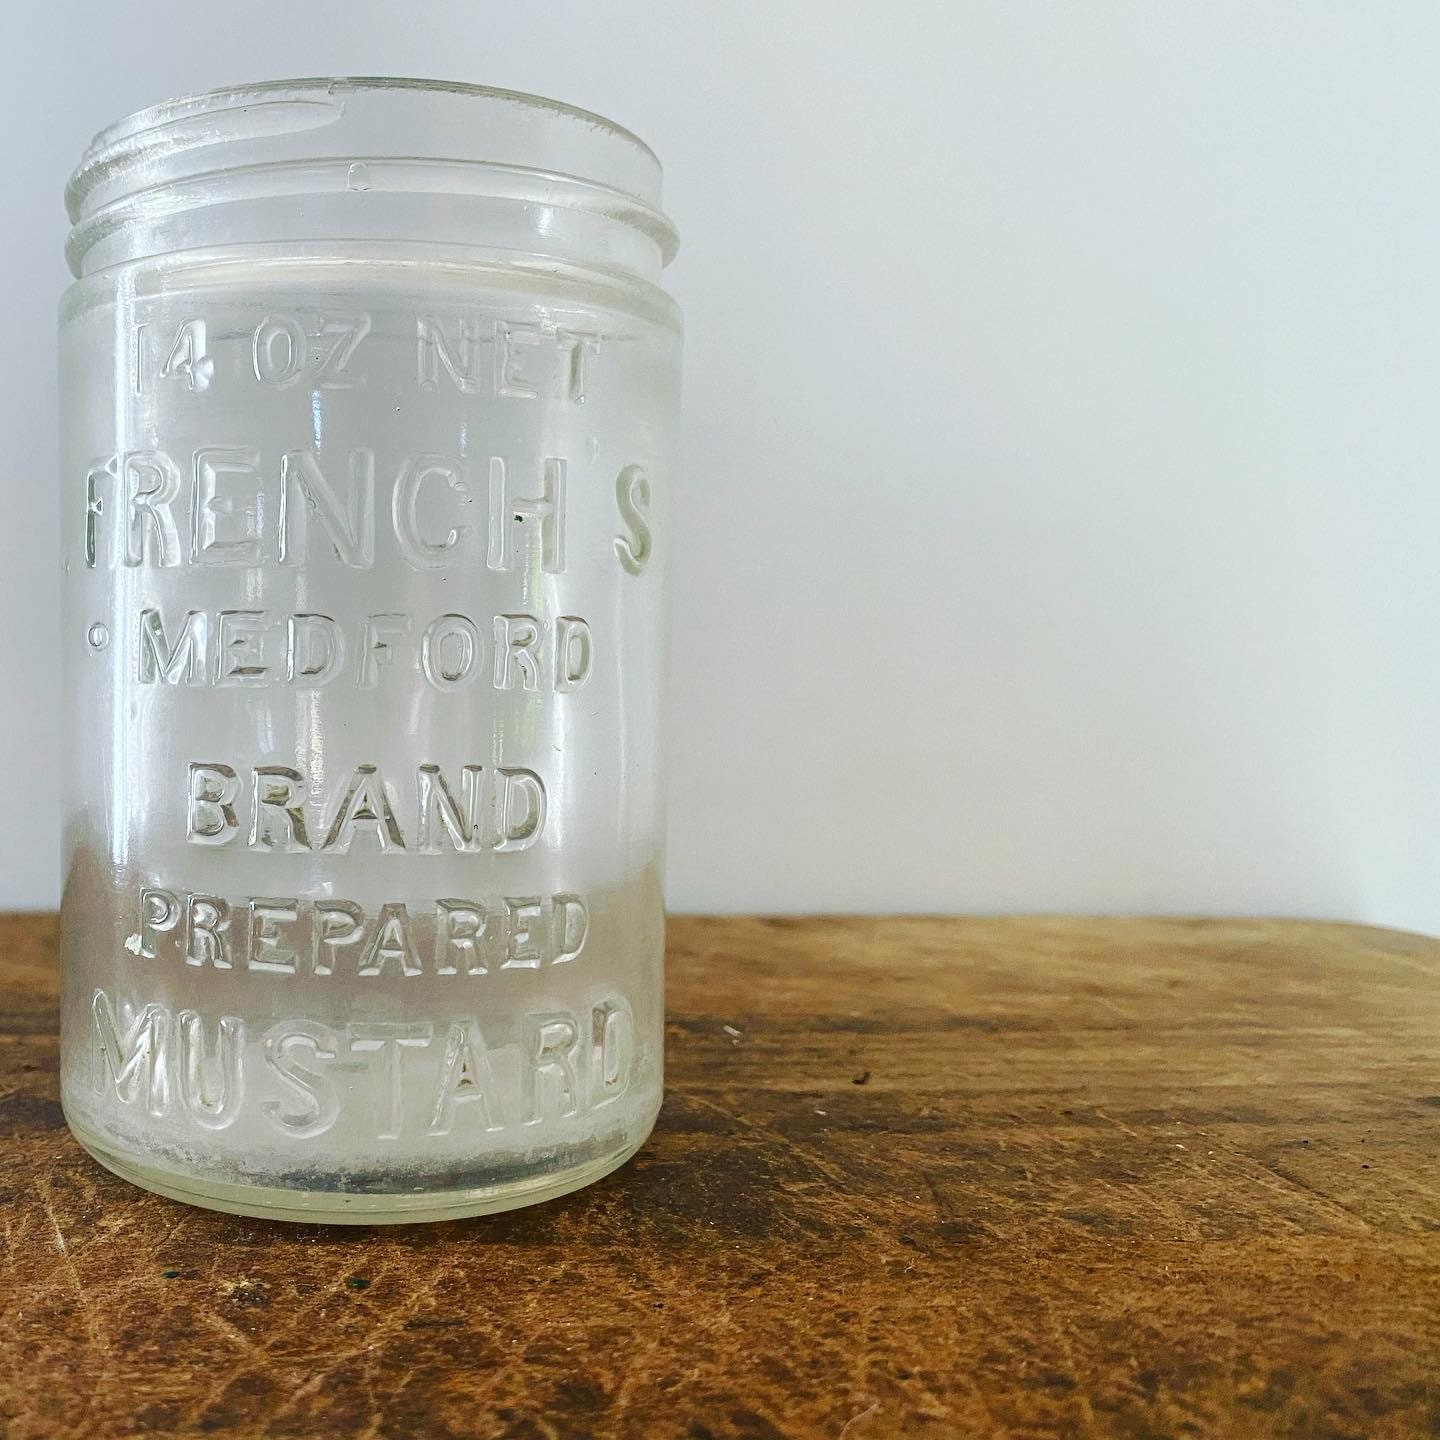 Develey mustard jars, made to become drinking glasses after the